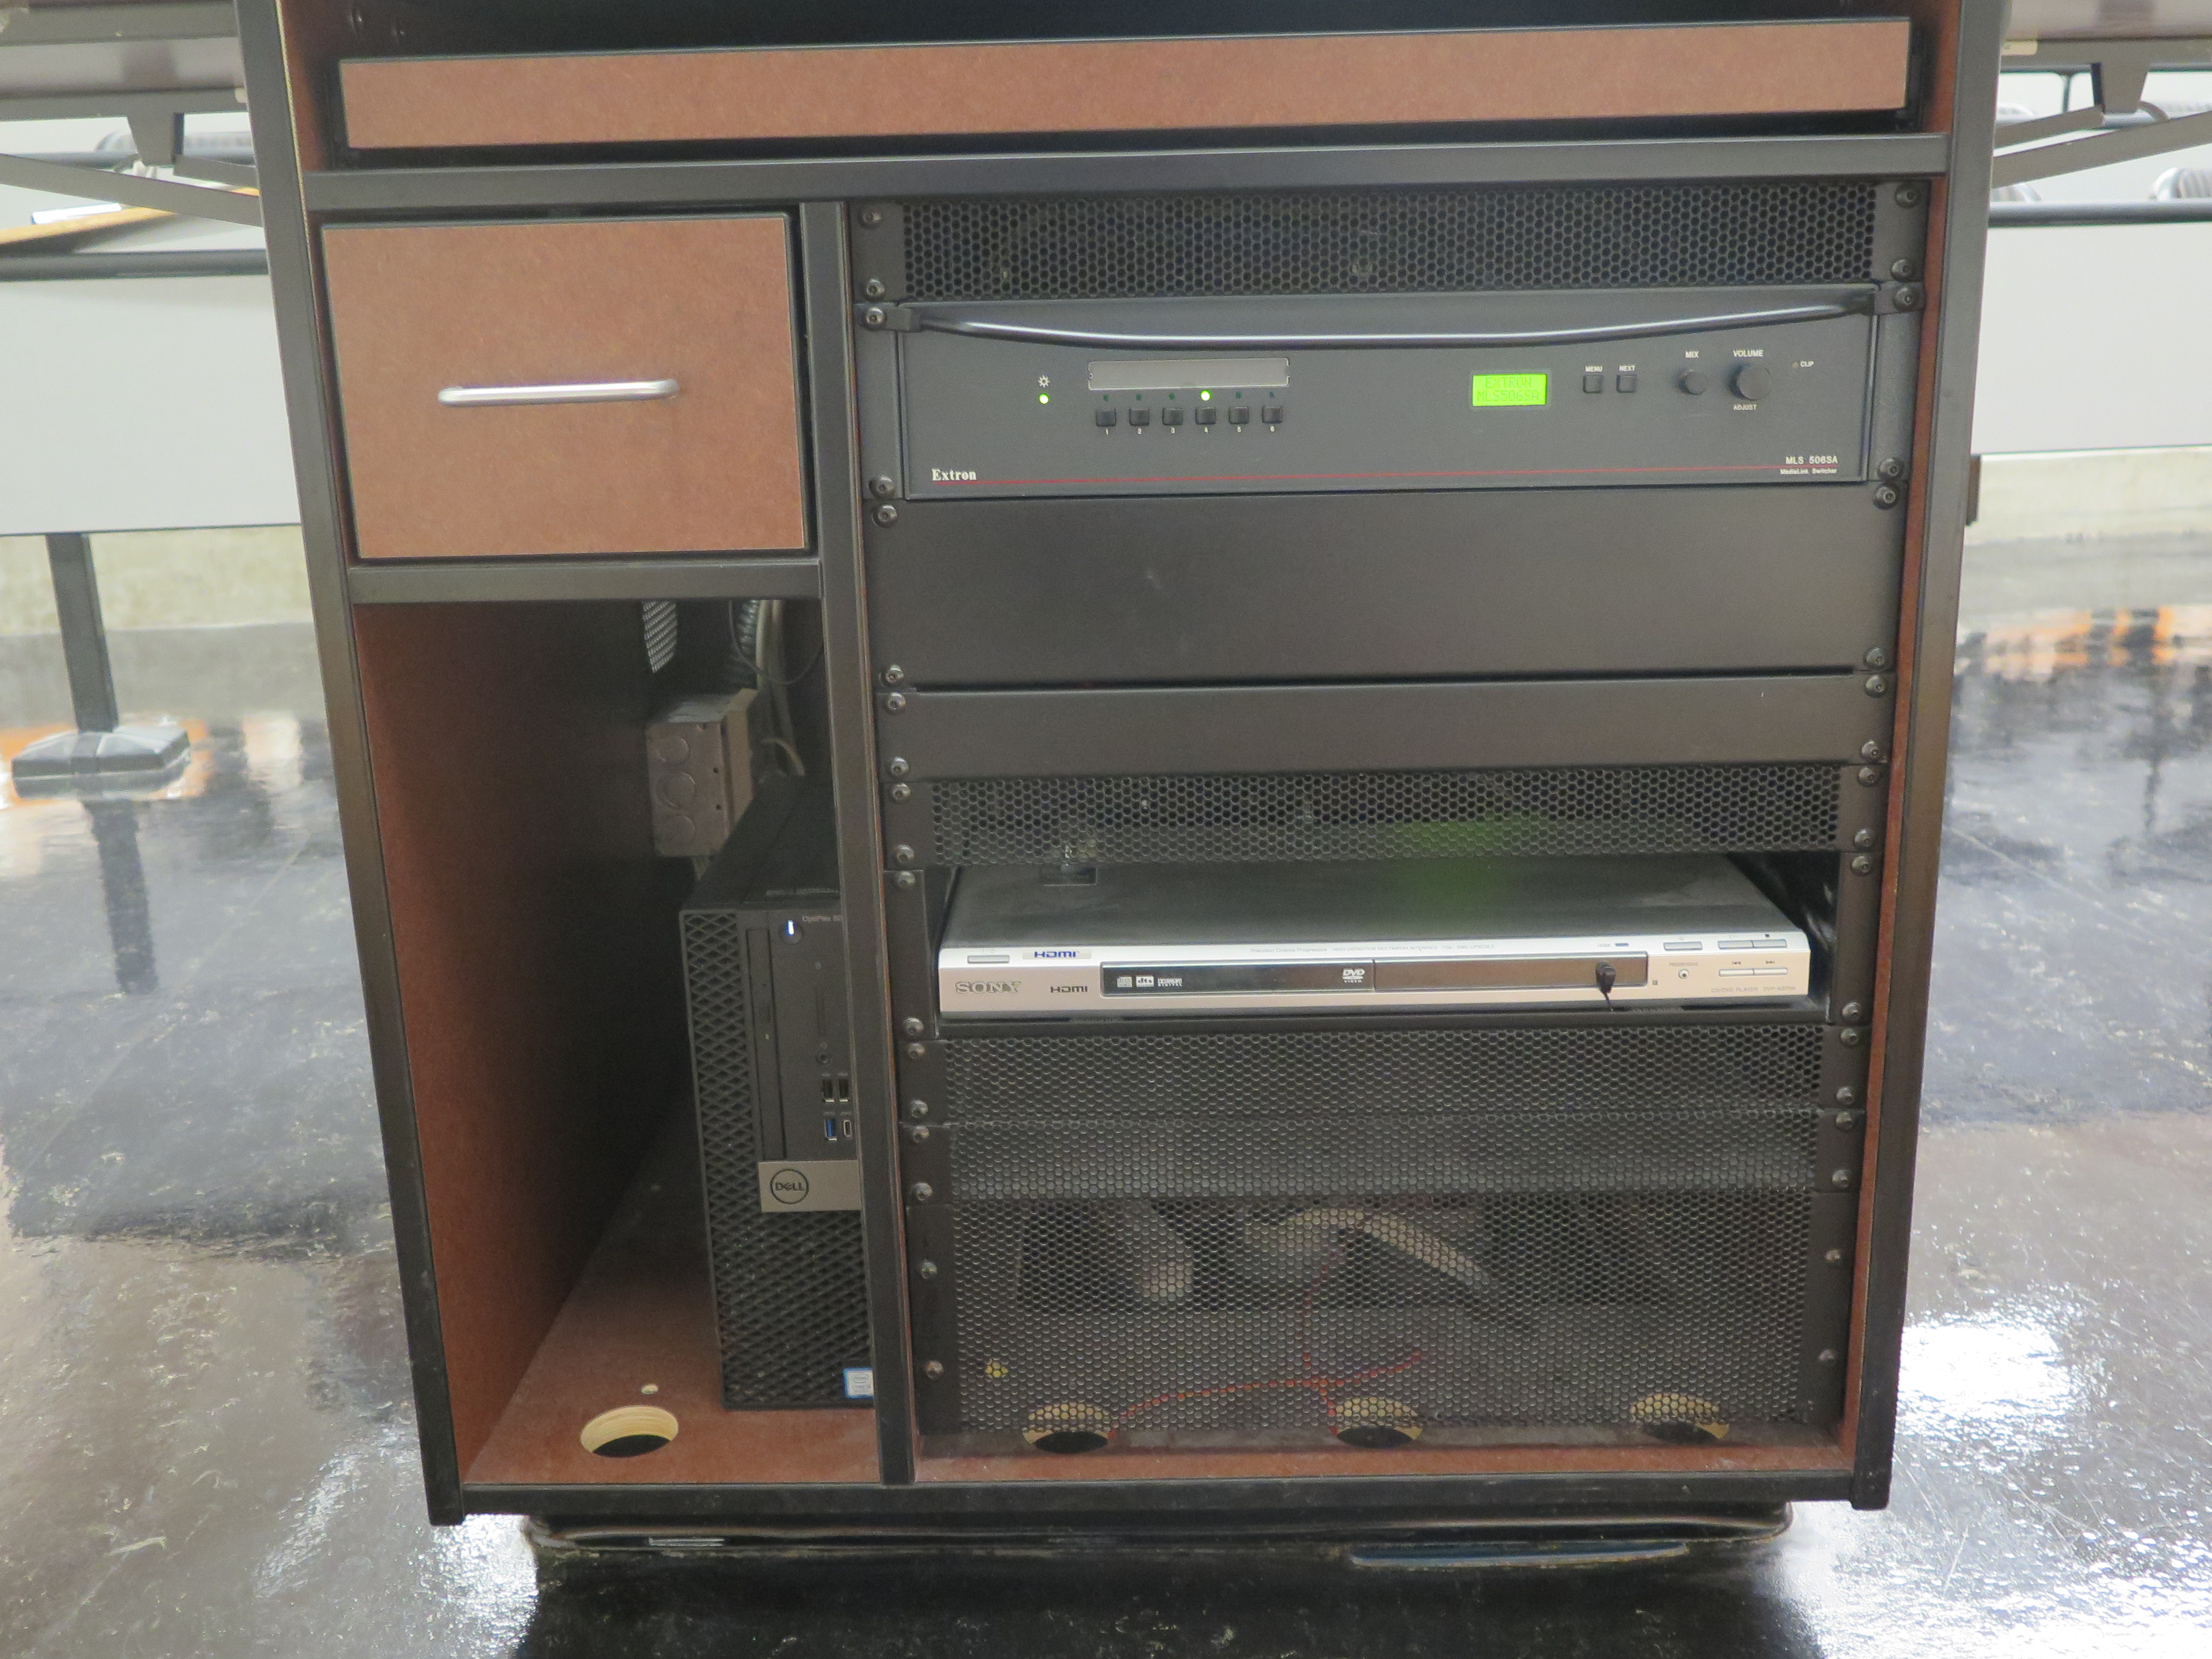 Front of Equipment rack showing AV Switcher. Below that is a DVD Player. To the left is the compartment with the Dell Computer CPU.